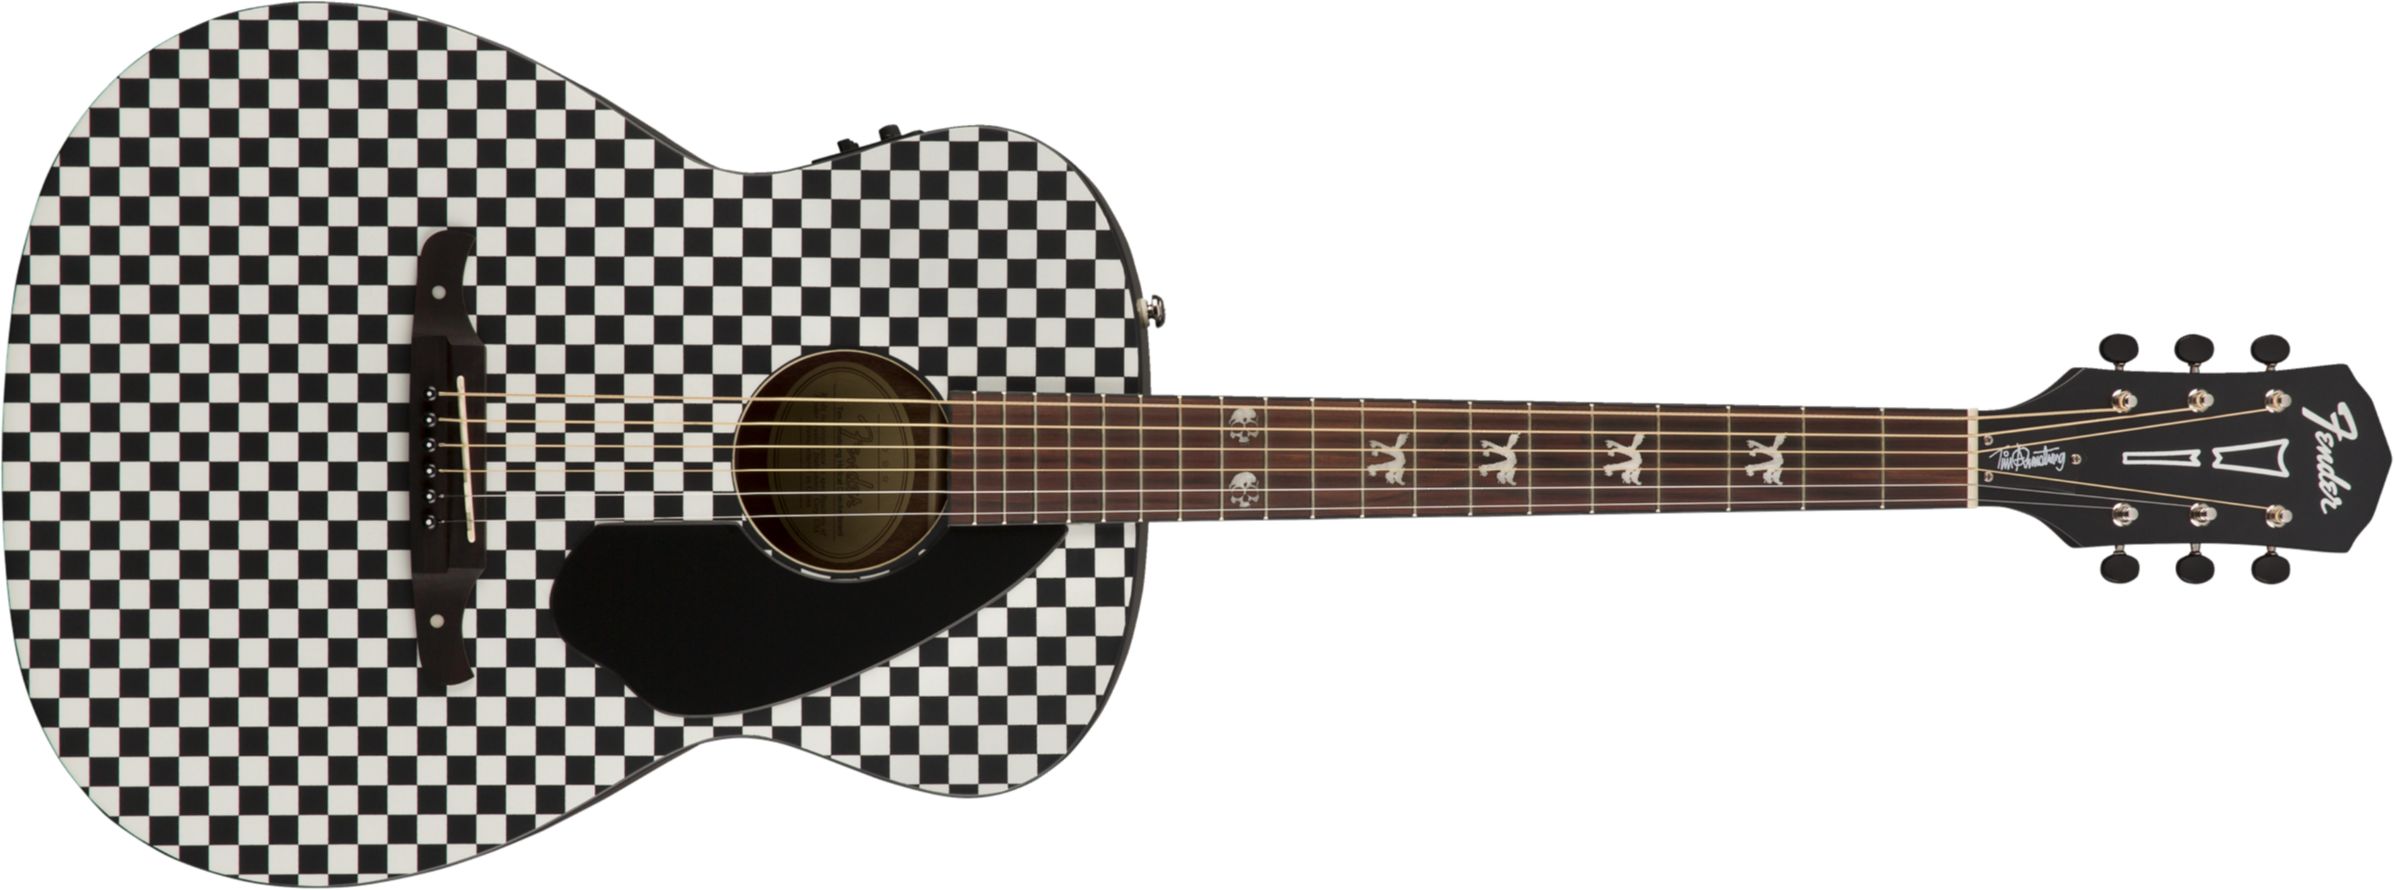 Fender Tim Armstrong Hellcat Epicea Acajou Wal - Checkerboard White/black - Electro acoustic guitar - Main picture